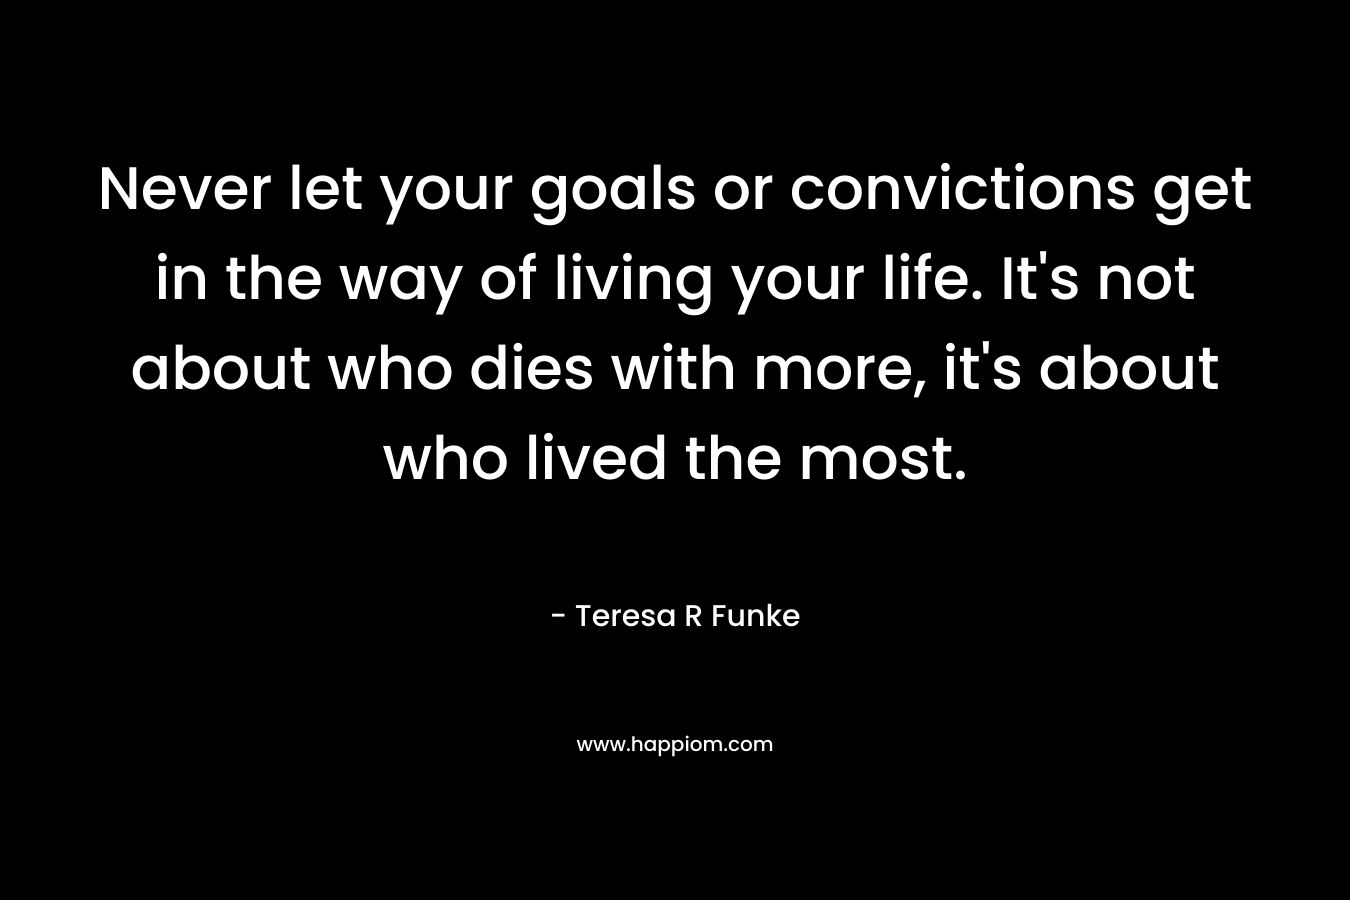 Never let your goals or convictions get in the way of living your life. It's not about who dies with more, it's about who lived the most.